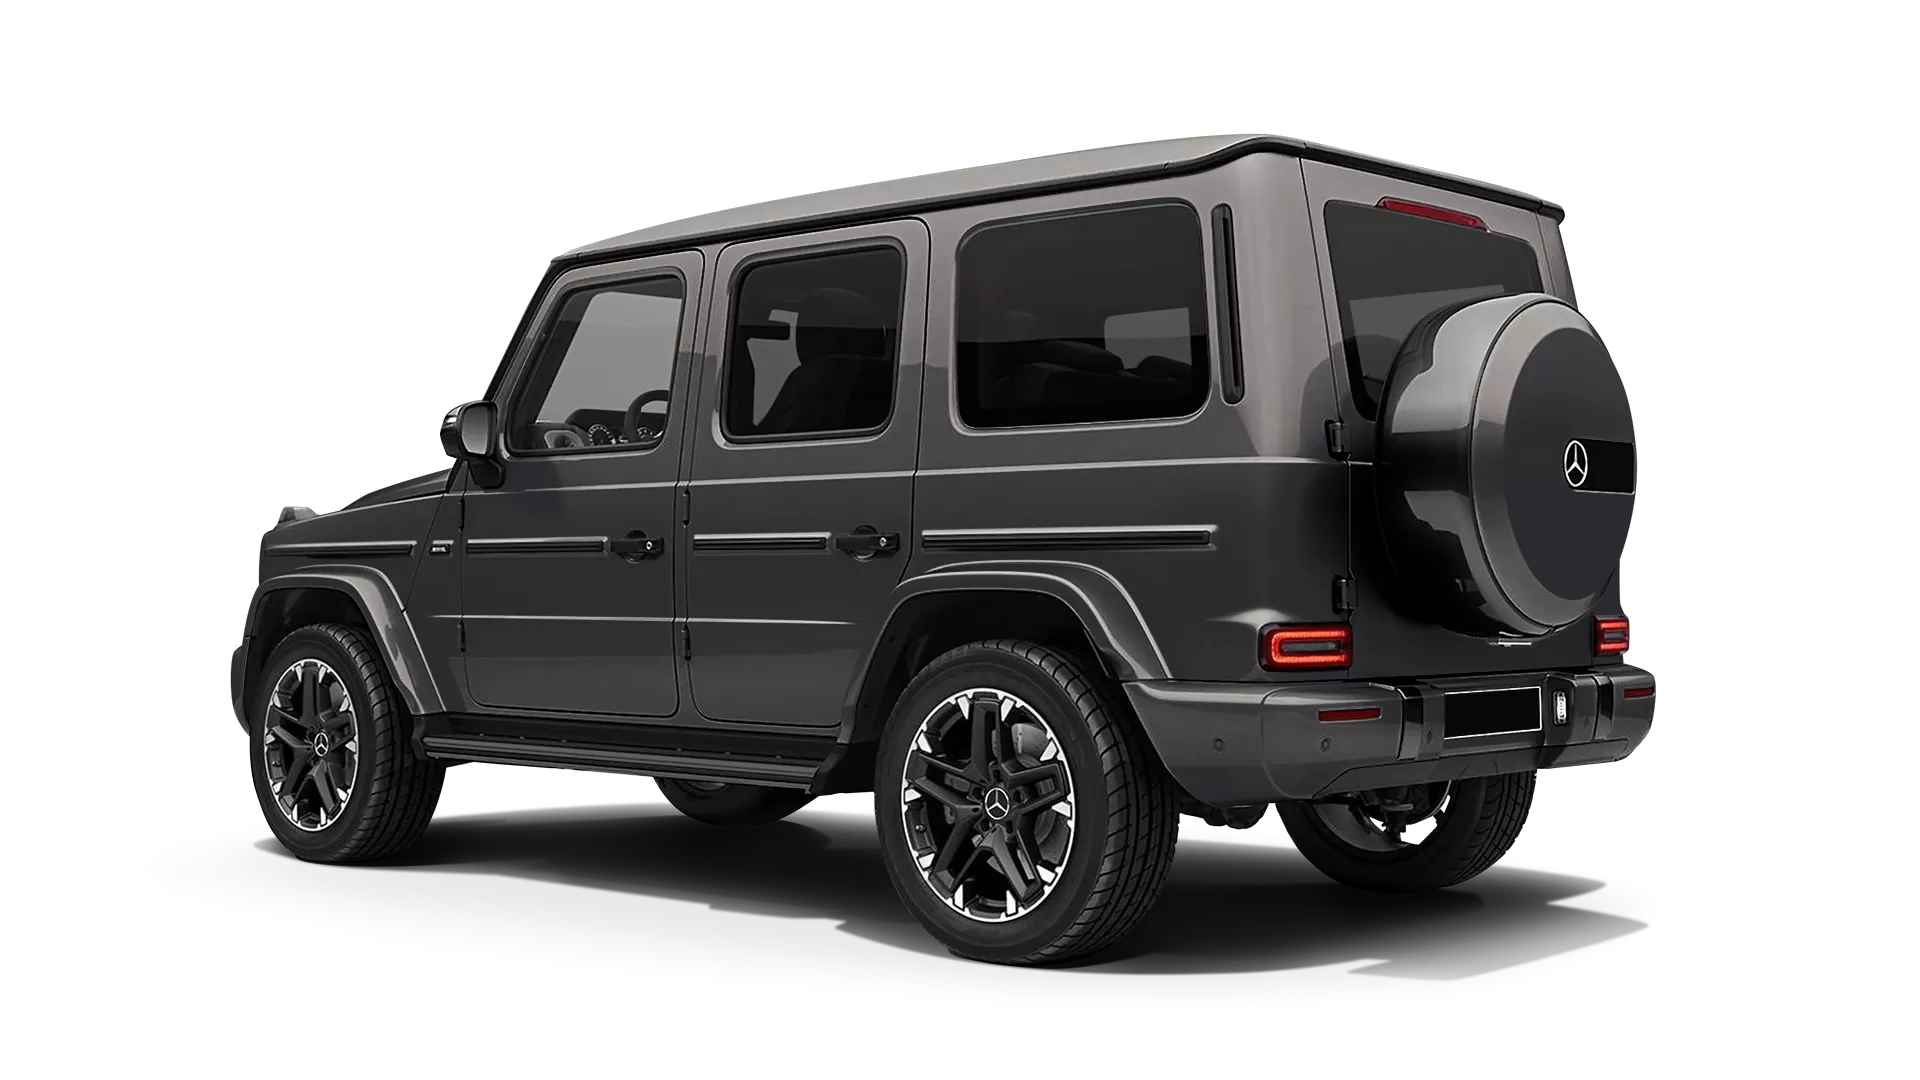 Mercedes G class W463 stock rear view in Indium Grey color